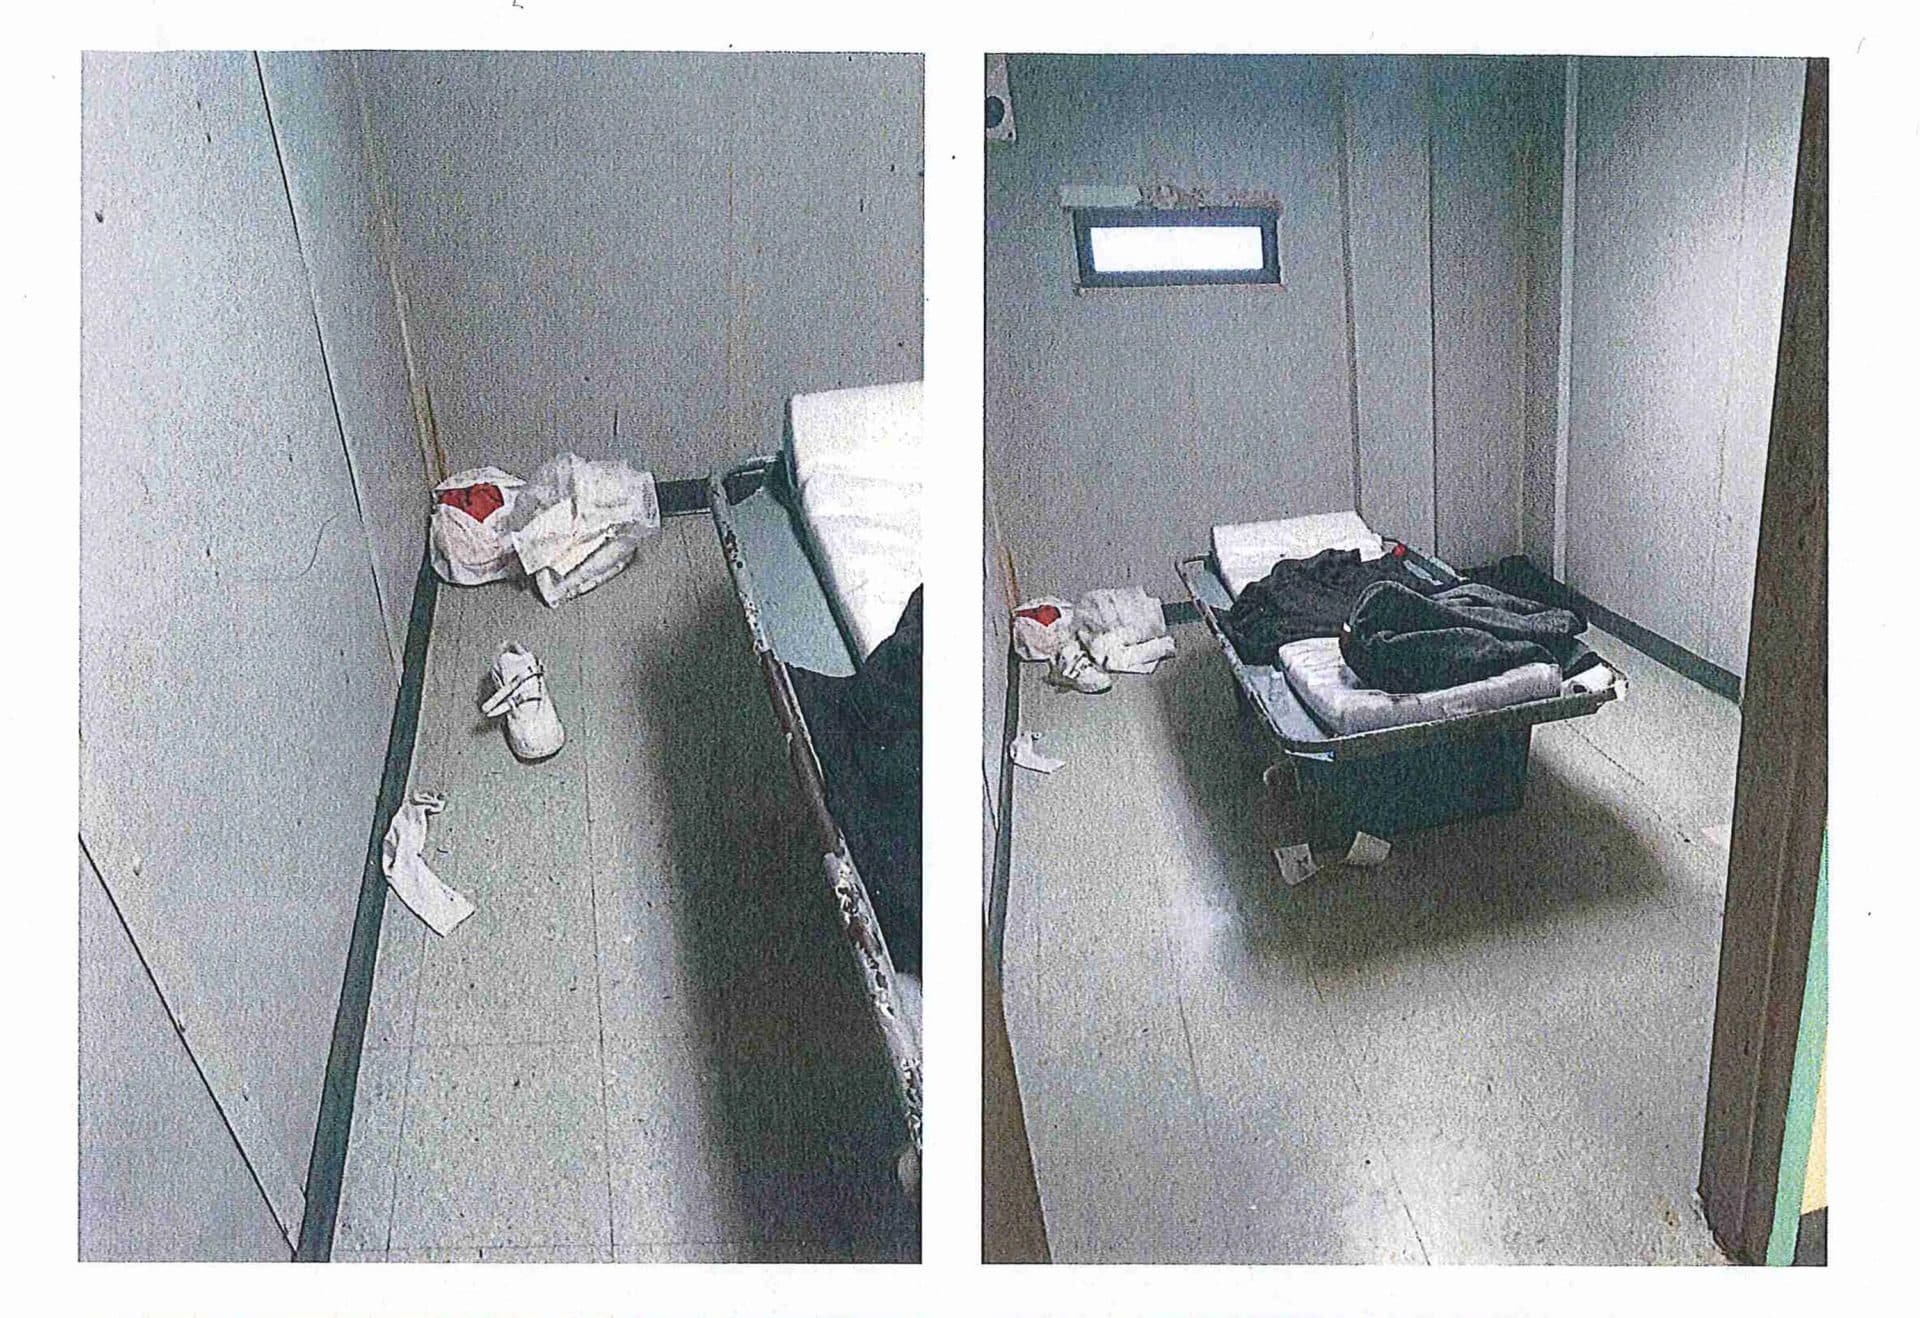 Investigation photographs of &quot;Risk Room 3&quot; after the death of Kevin Chamberlain. (Courtesy Essex County jail)